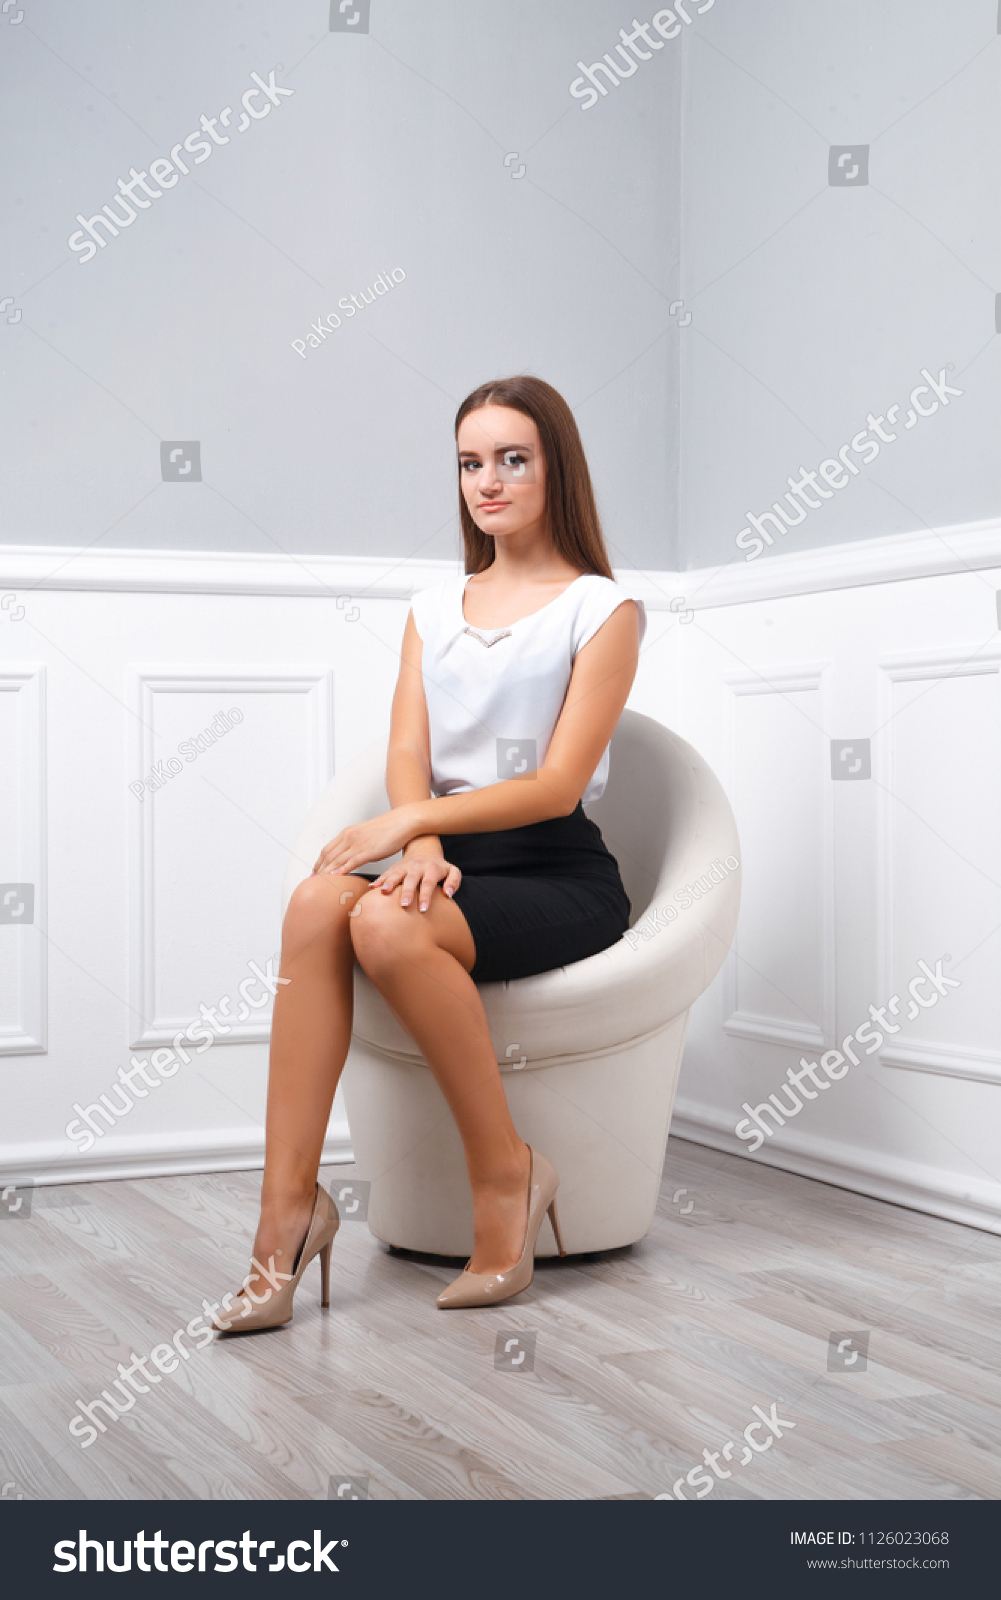 Young beautiful girl sits on a white round armchair in full growth, business style clothes, high heel shoes, leg on leg, looks at the camera. A series of photos #1126023068